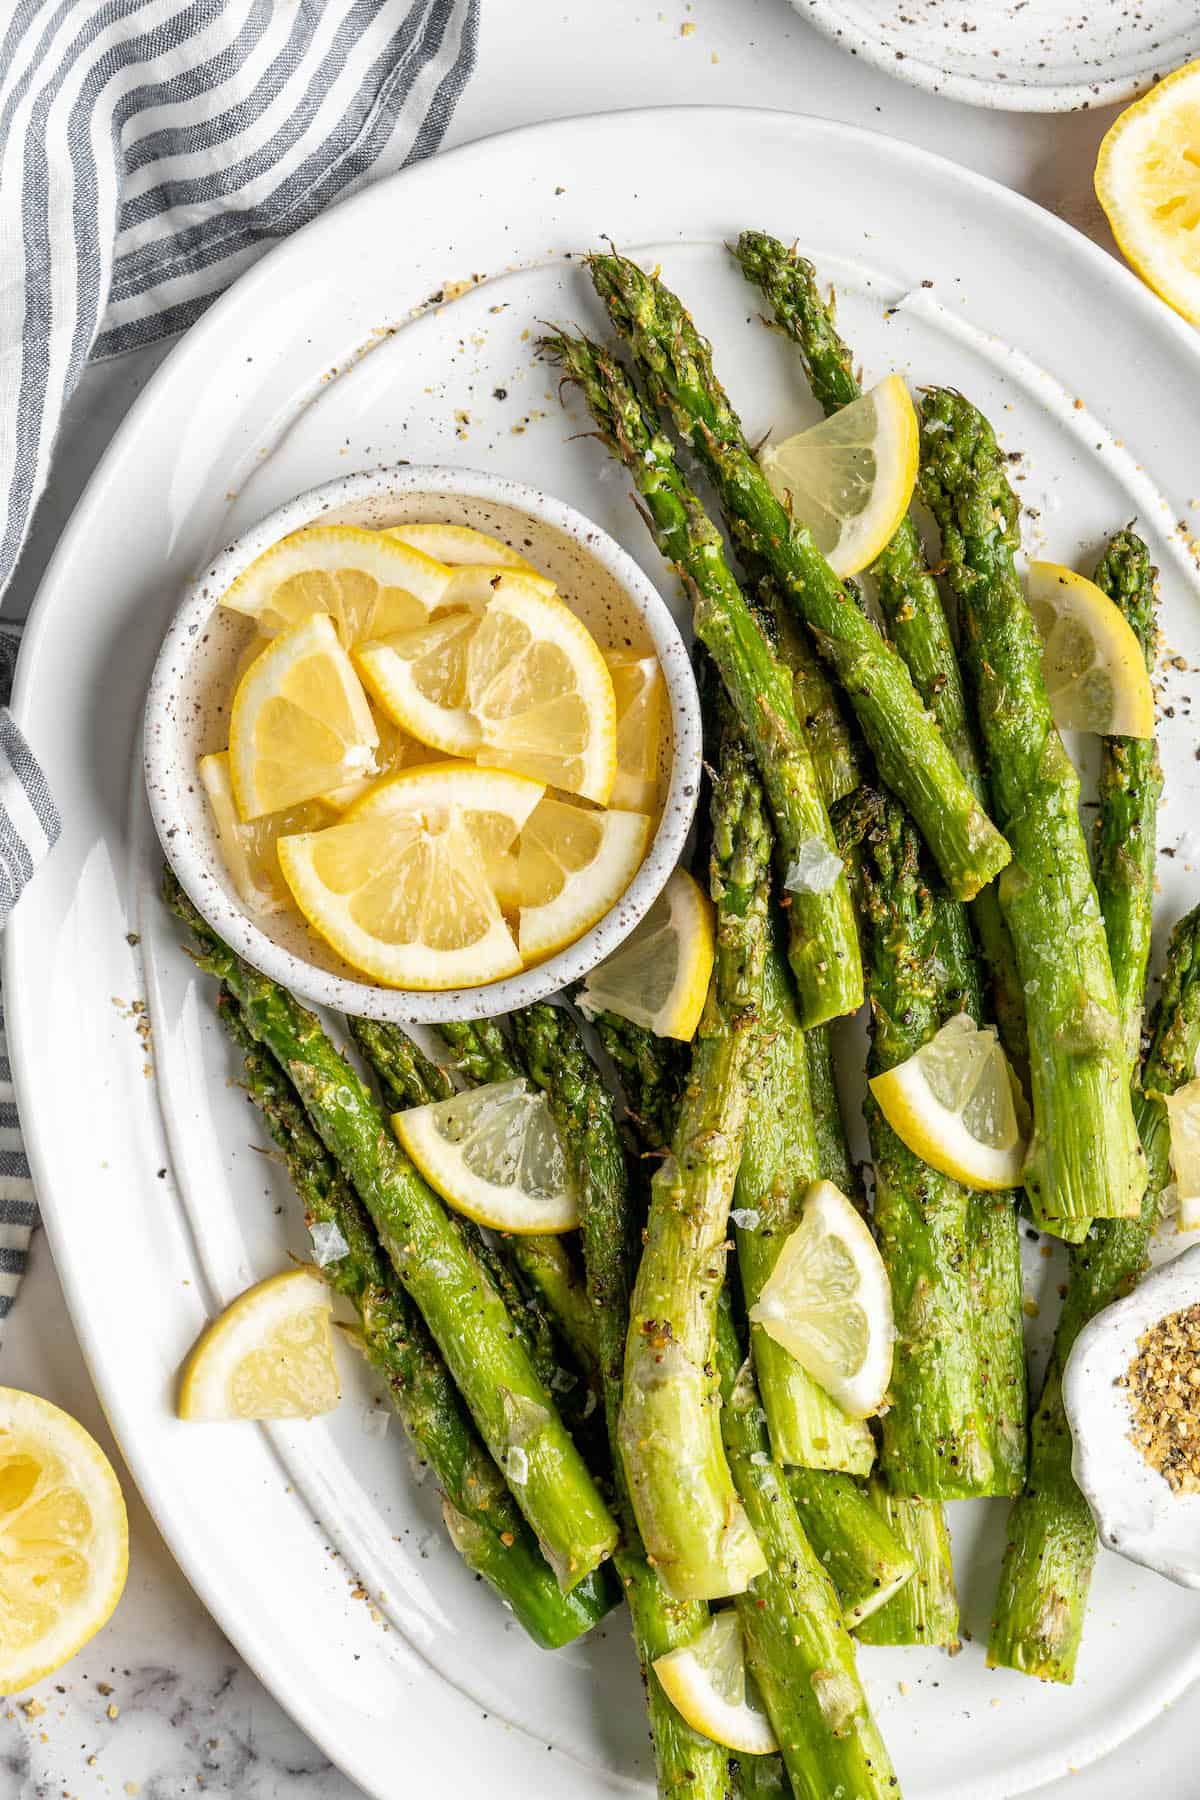 Overhead view of air fryer asparagus on serving platter with bowl of lemon wedges